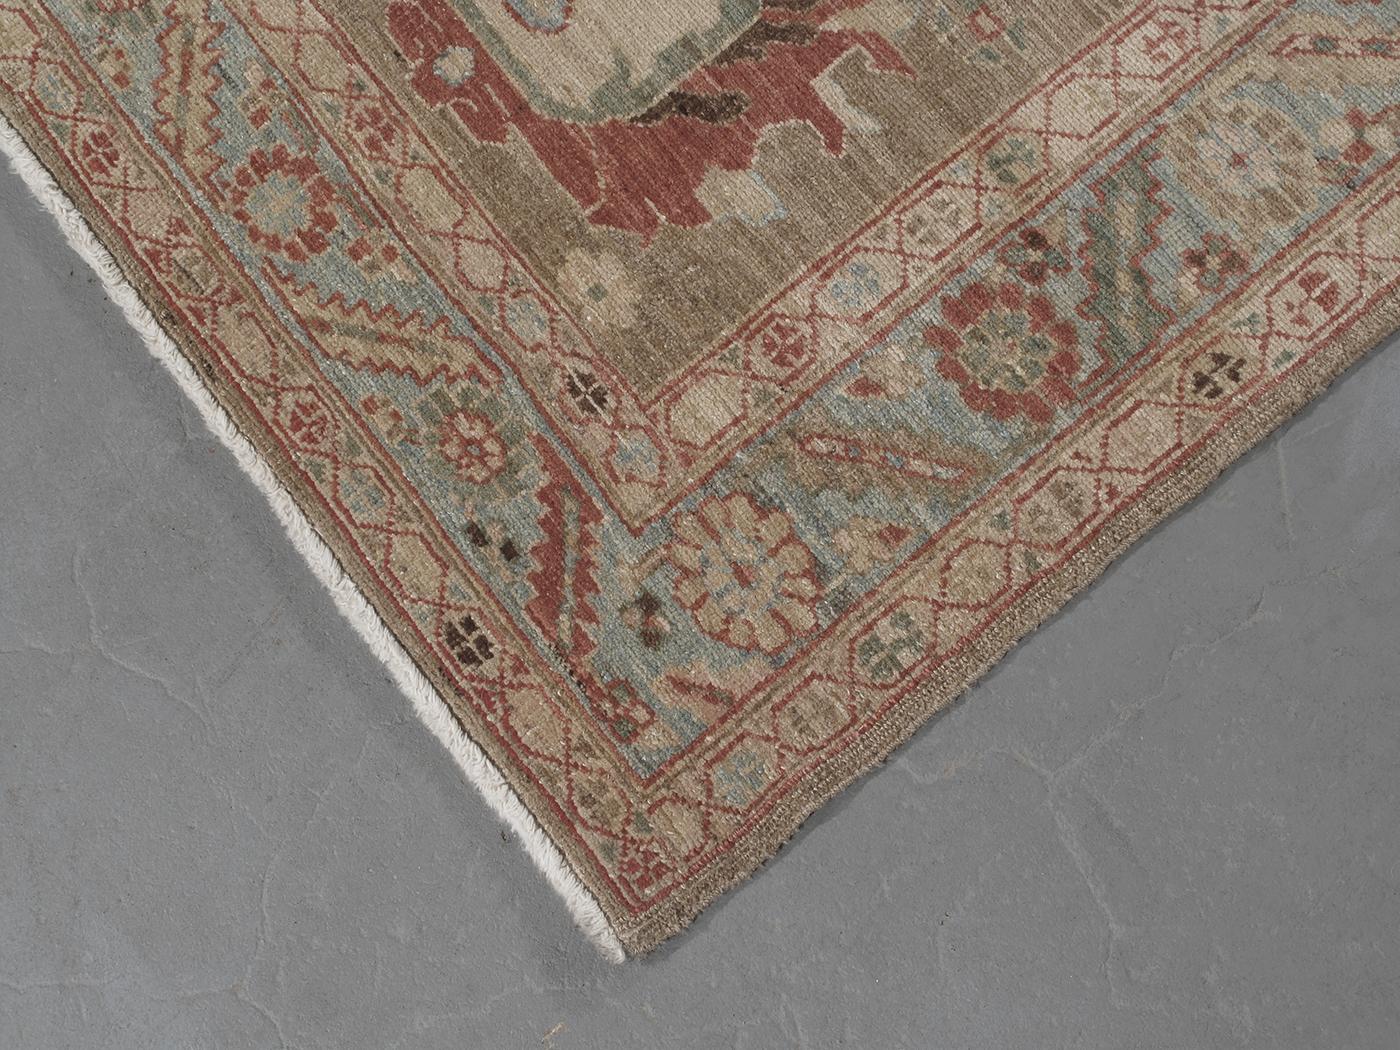 Persian Traditional Bakshaish Hand-Knotted Runner in Camel, Blue, Rust Colors In New Condition For Sale In New York, NY